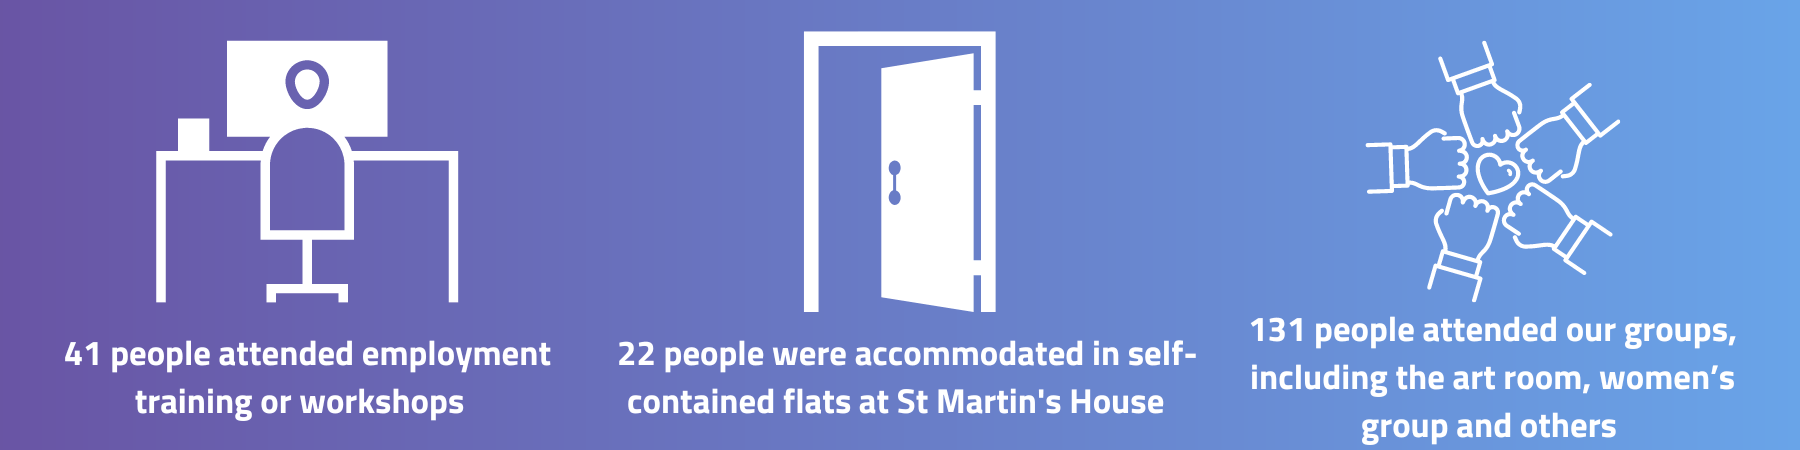 White text on purple and blue background reads, 41 people attended employment training or workshops, 22 people were accommodated in self-contained flats at St Martin's House, 131 people attended our groups, including the art room, women’s group and others